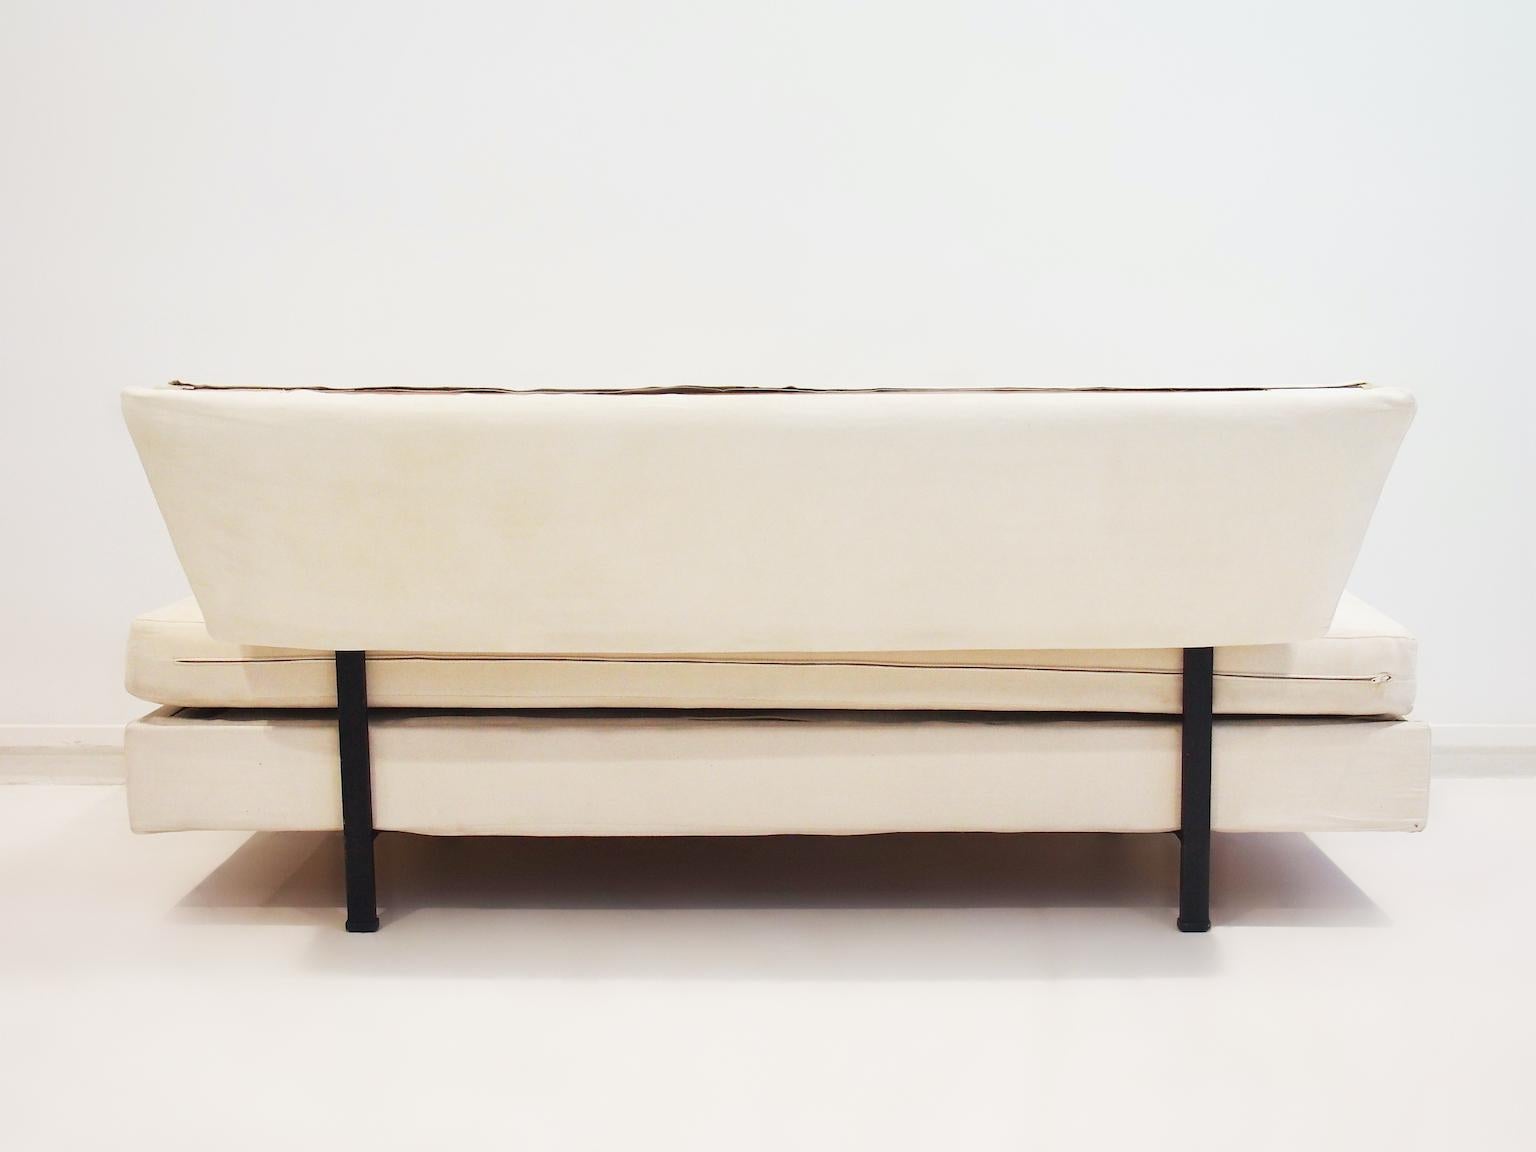 Italian Modernist Daybed with White Upholstery and Iron Frame For Sale 1